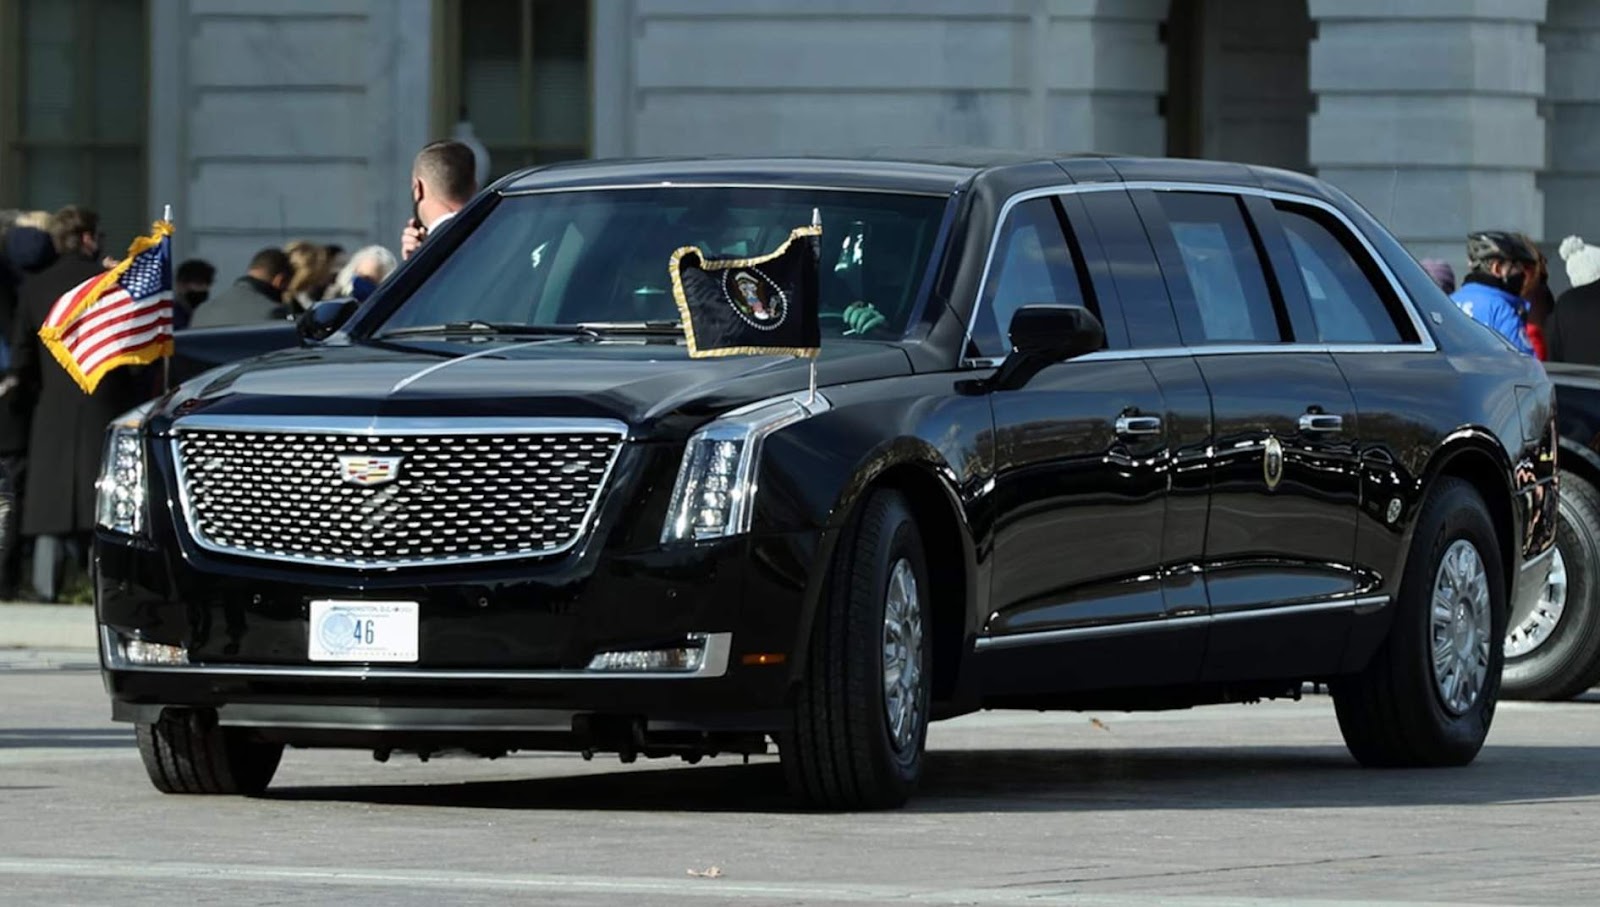 The US President's vehicle known as The Beast